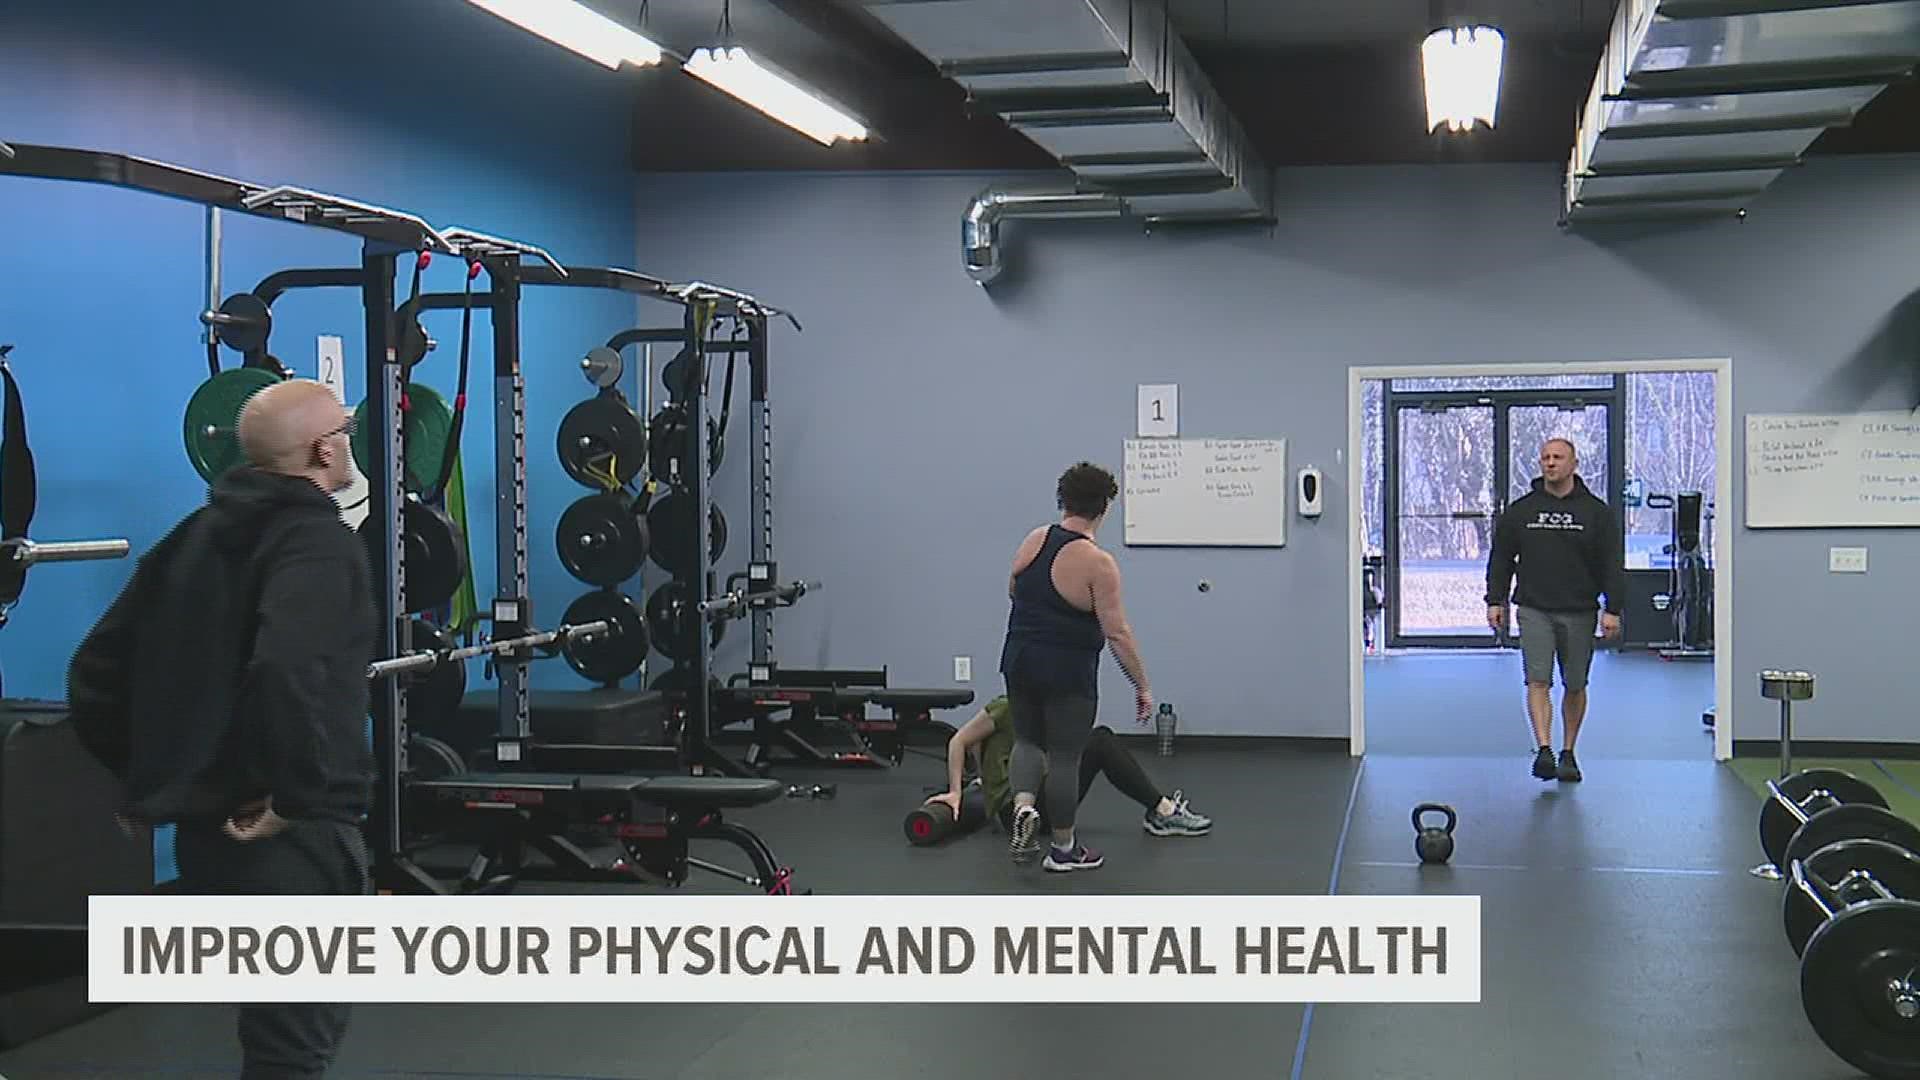 While we often associate fitness and physical health, workouts can have a major impact on one's mental health